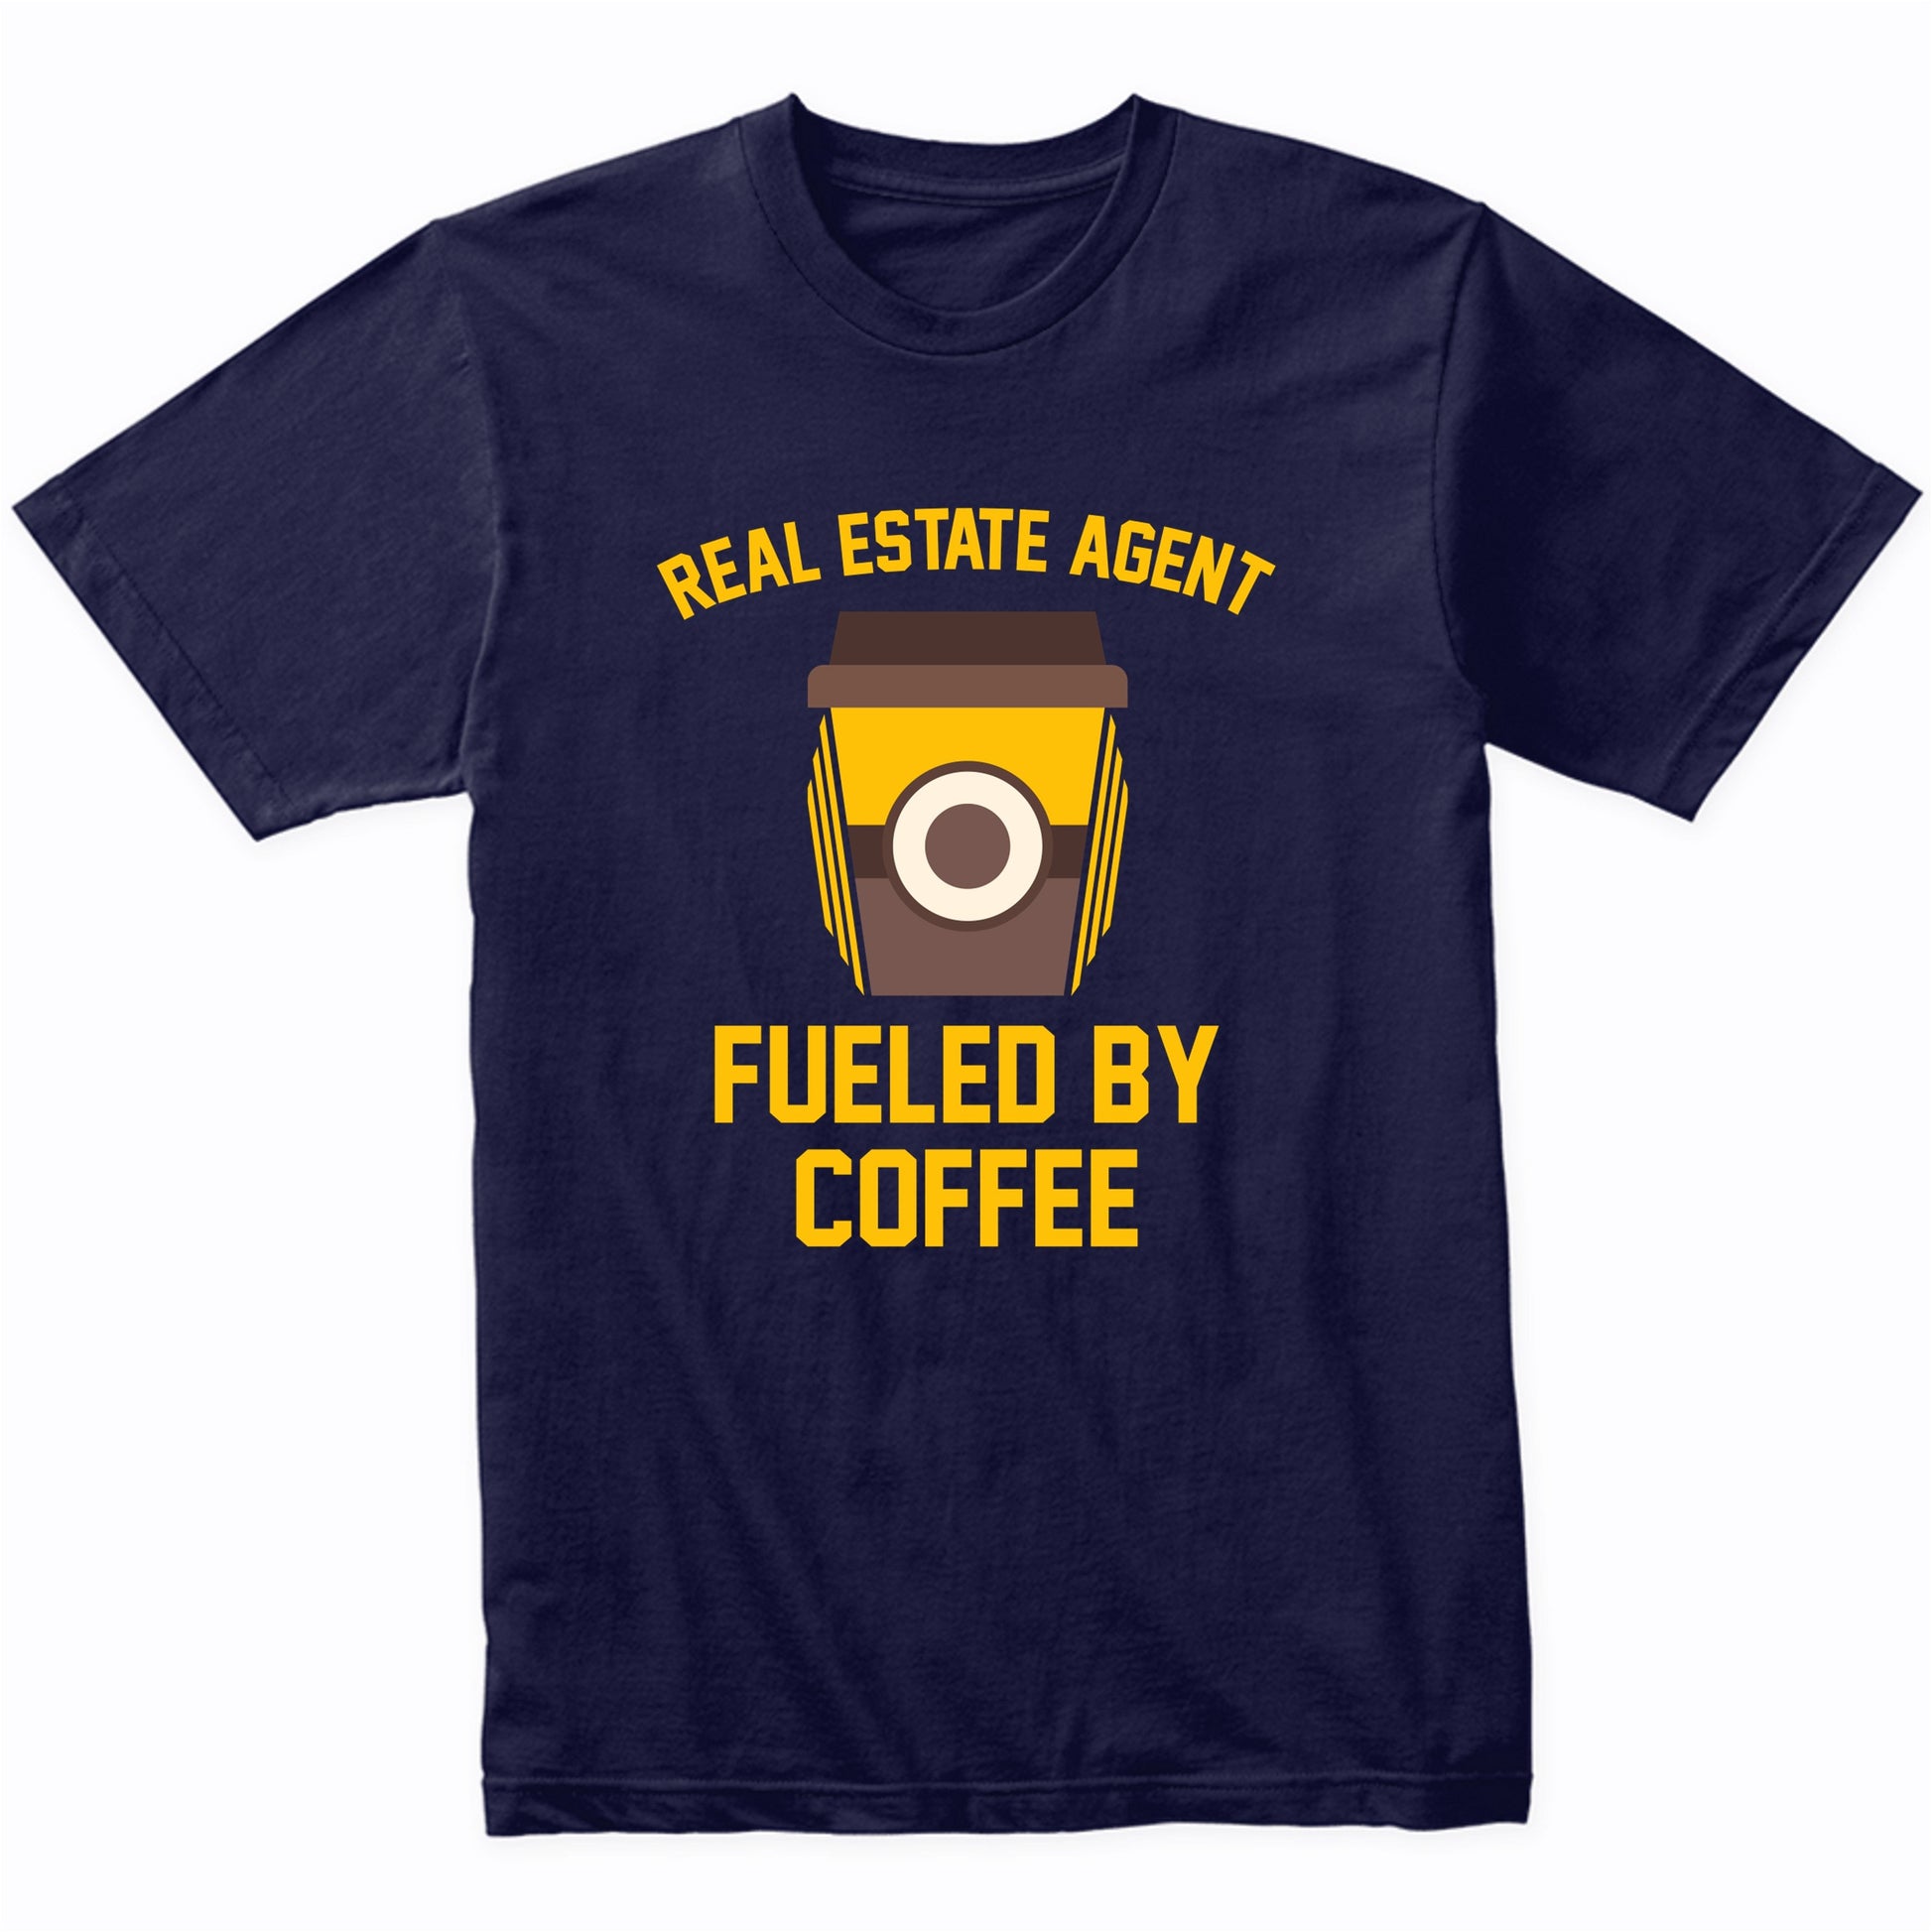 Real Estate Agent Fueled By Coffee Funny Shirt